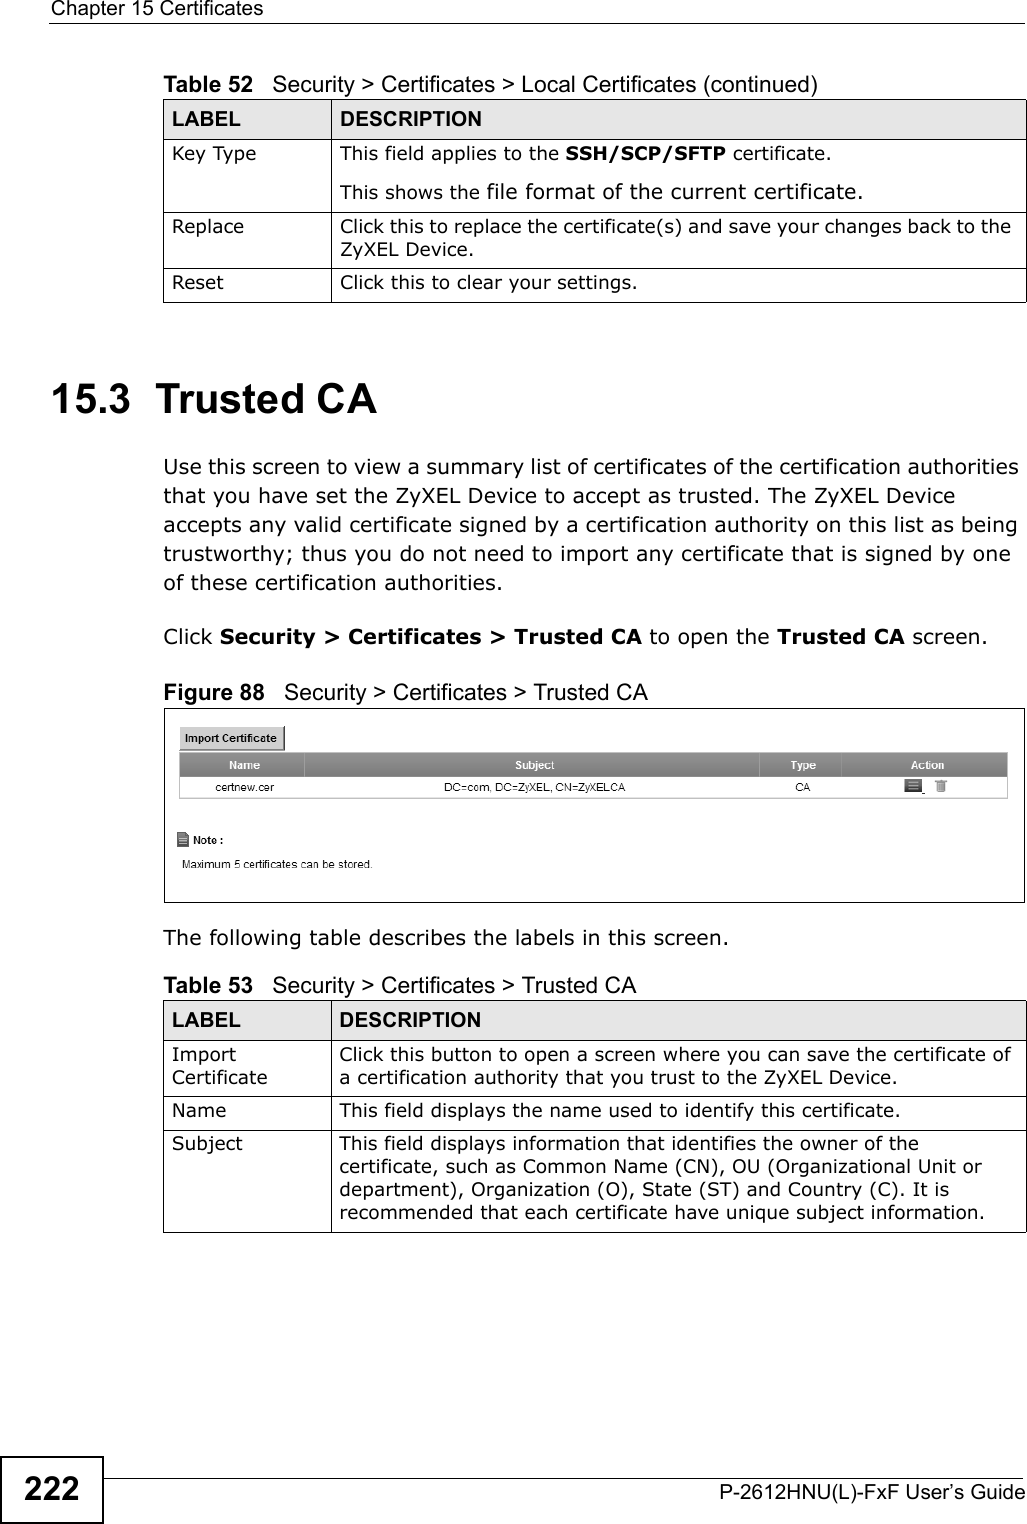 Chapter 15 CertificatesP-2612HNU(L)-FxF User’s Guide22215.3  Trusted CA   Use this screen to view a summary list of certificates of the certification authorities that you have set the ZyXEL Device to accept as trusted. The ZyXEL Device accepts any valid certificate signed by a certification authority on this list as being trustworthy; thus you do not need to import any certificate that is signed by one of these certification authorities.Click Security &gt; Certificates &gt; Trusted CA to open the Trusted CA screen. Figure 88   Security &gt; Certificates &gt; Trusted CAThe following table describes the labels in this screen. Key Type This field applies to the SSH/SCP/SFTP certificate.This shows the file format of the current certificate.Replace Click this to replace the certificate(s) and save your changes back to the ZyXEL Device.Reset Click this to clear your settings.Table 52   Security &gt; Certificates &gt; Local Certificates (continued)LABEL DESCRIPTIONTable 53   Security &gt; Certificates &gt; Trusted CALABEL DESCRIPTIONImport CertificateClick this button to open a screen where you can save the certificate of a certification authority that you trust to the ZyXEL Device.Name This field displays the name used to identify this certificate.Subject This field displays information that identifies the owner of the certificate, such as Common Name (CN), OU (Organizational Unit or department), Organization (O), State (ST) and Country (C). It is recommended that each certificate have unique subject information.